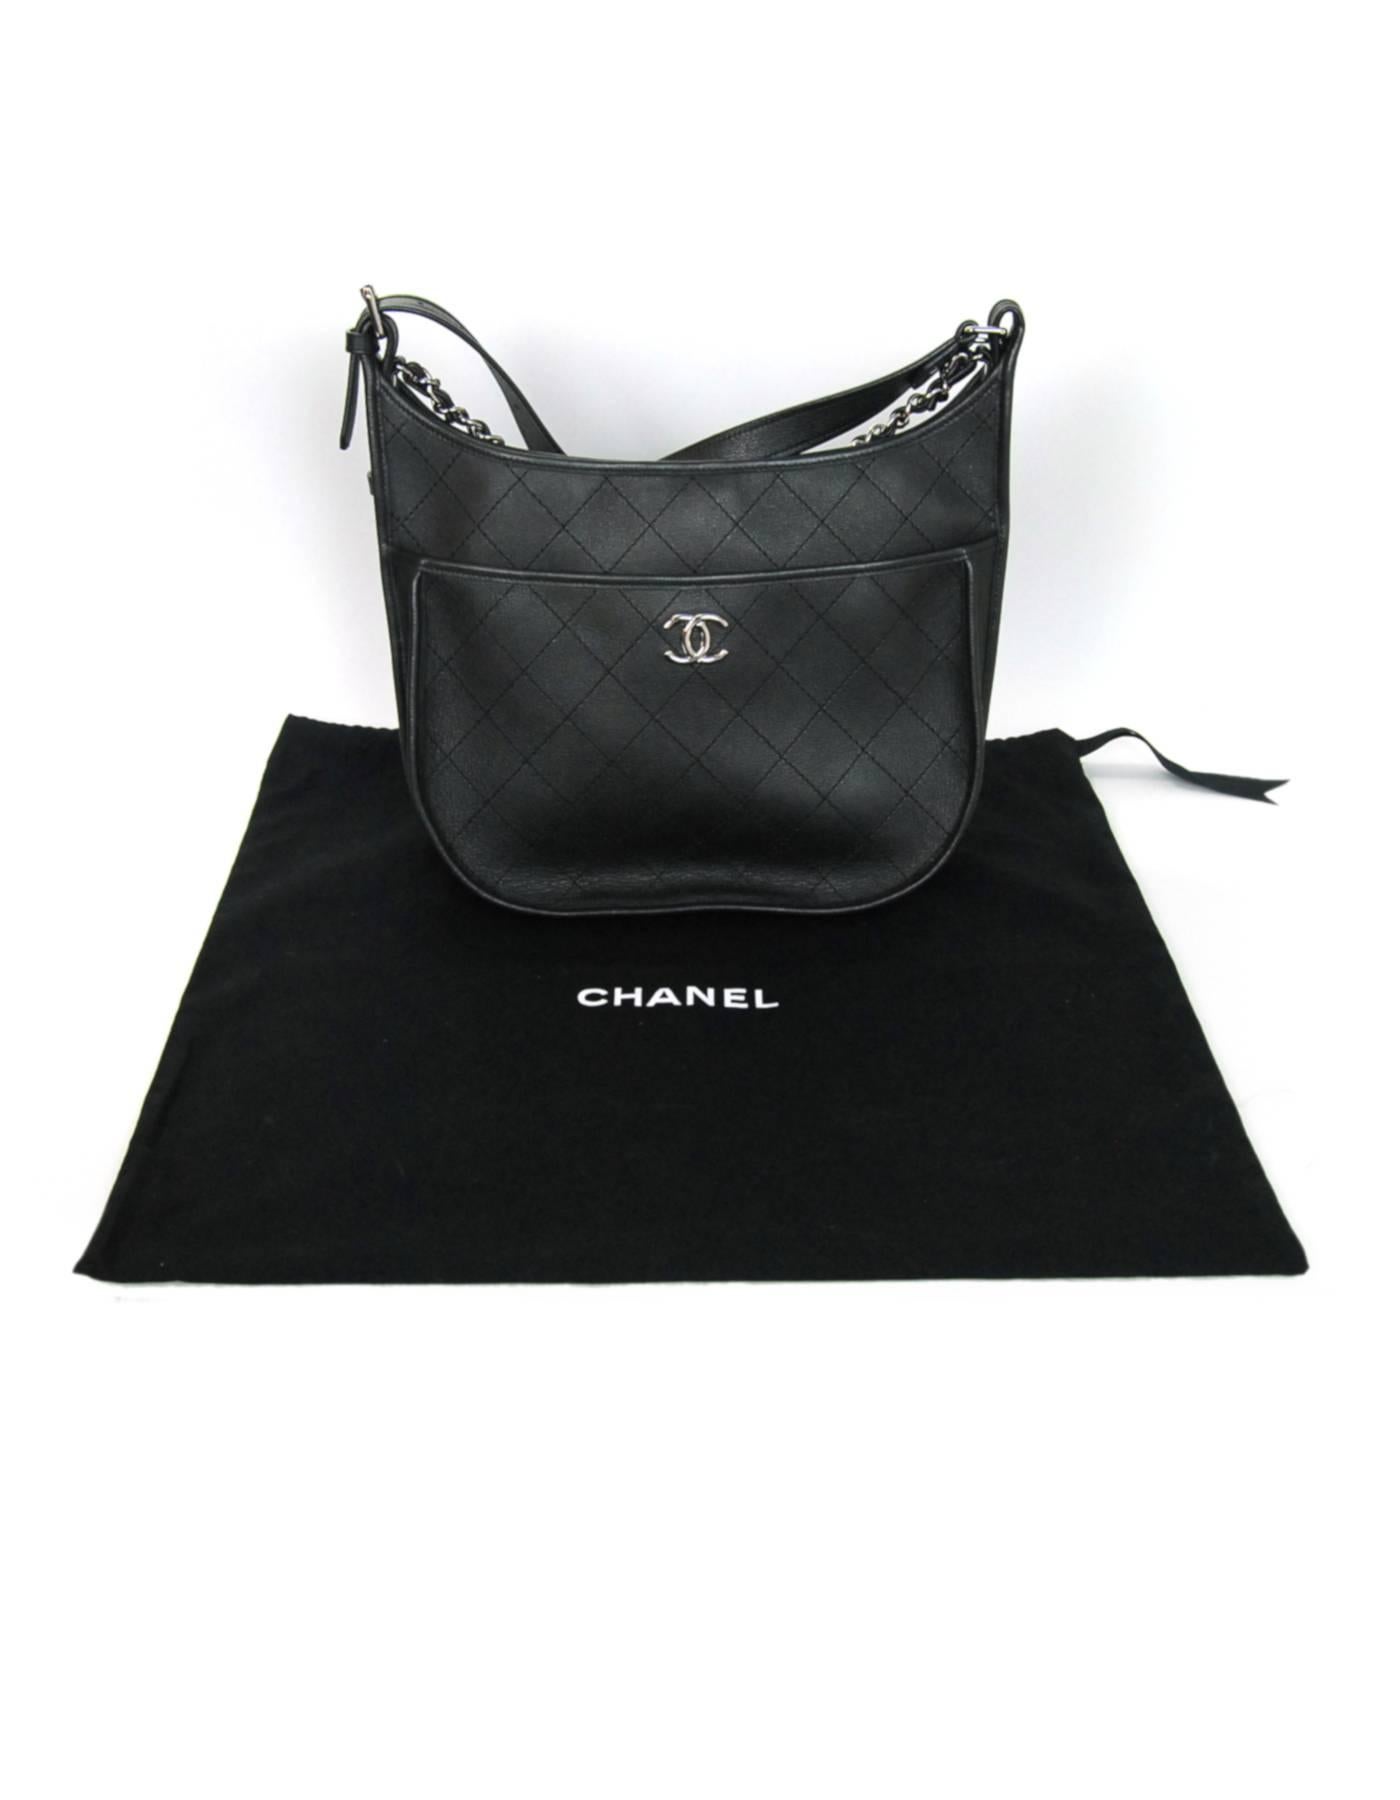 Chanel 2018 Black Metallic Quilted Leather Hobo Messenger Bag w. Receipt rt. $4K 2